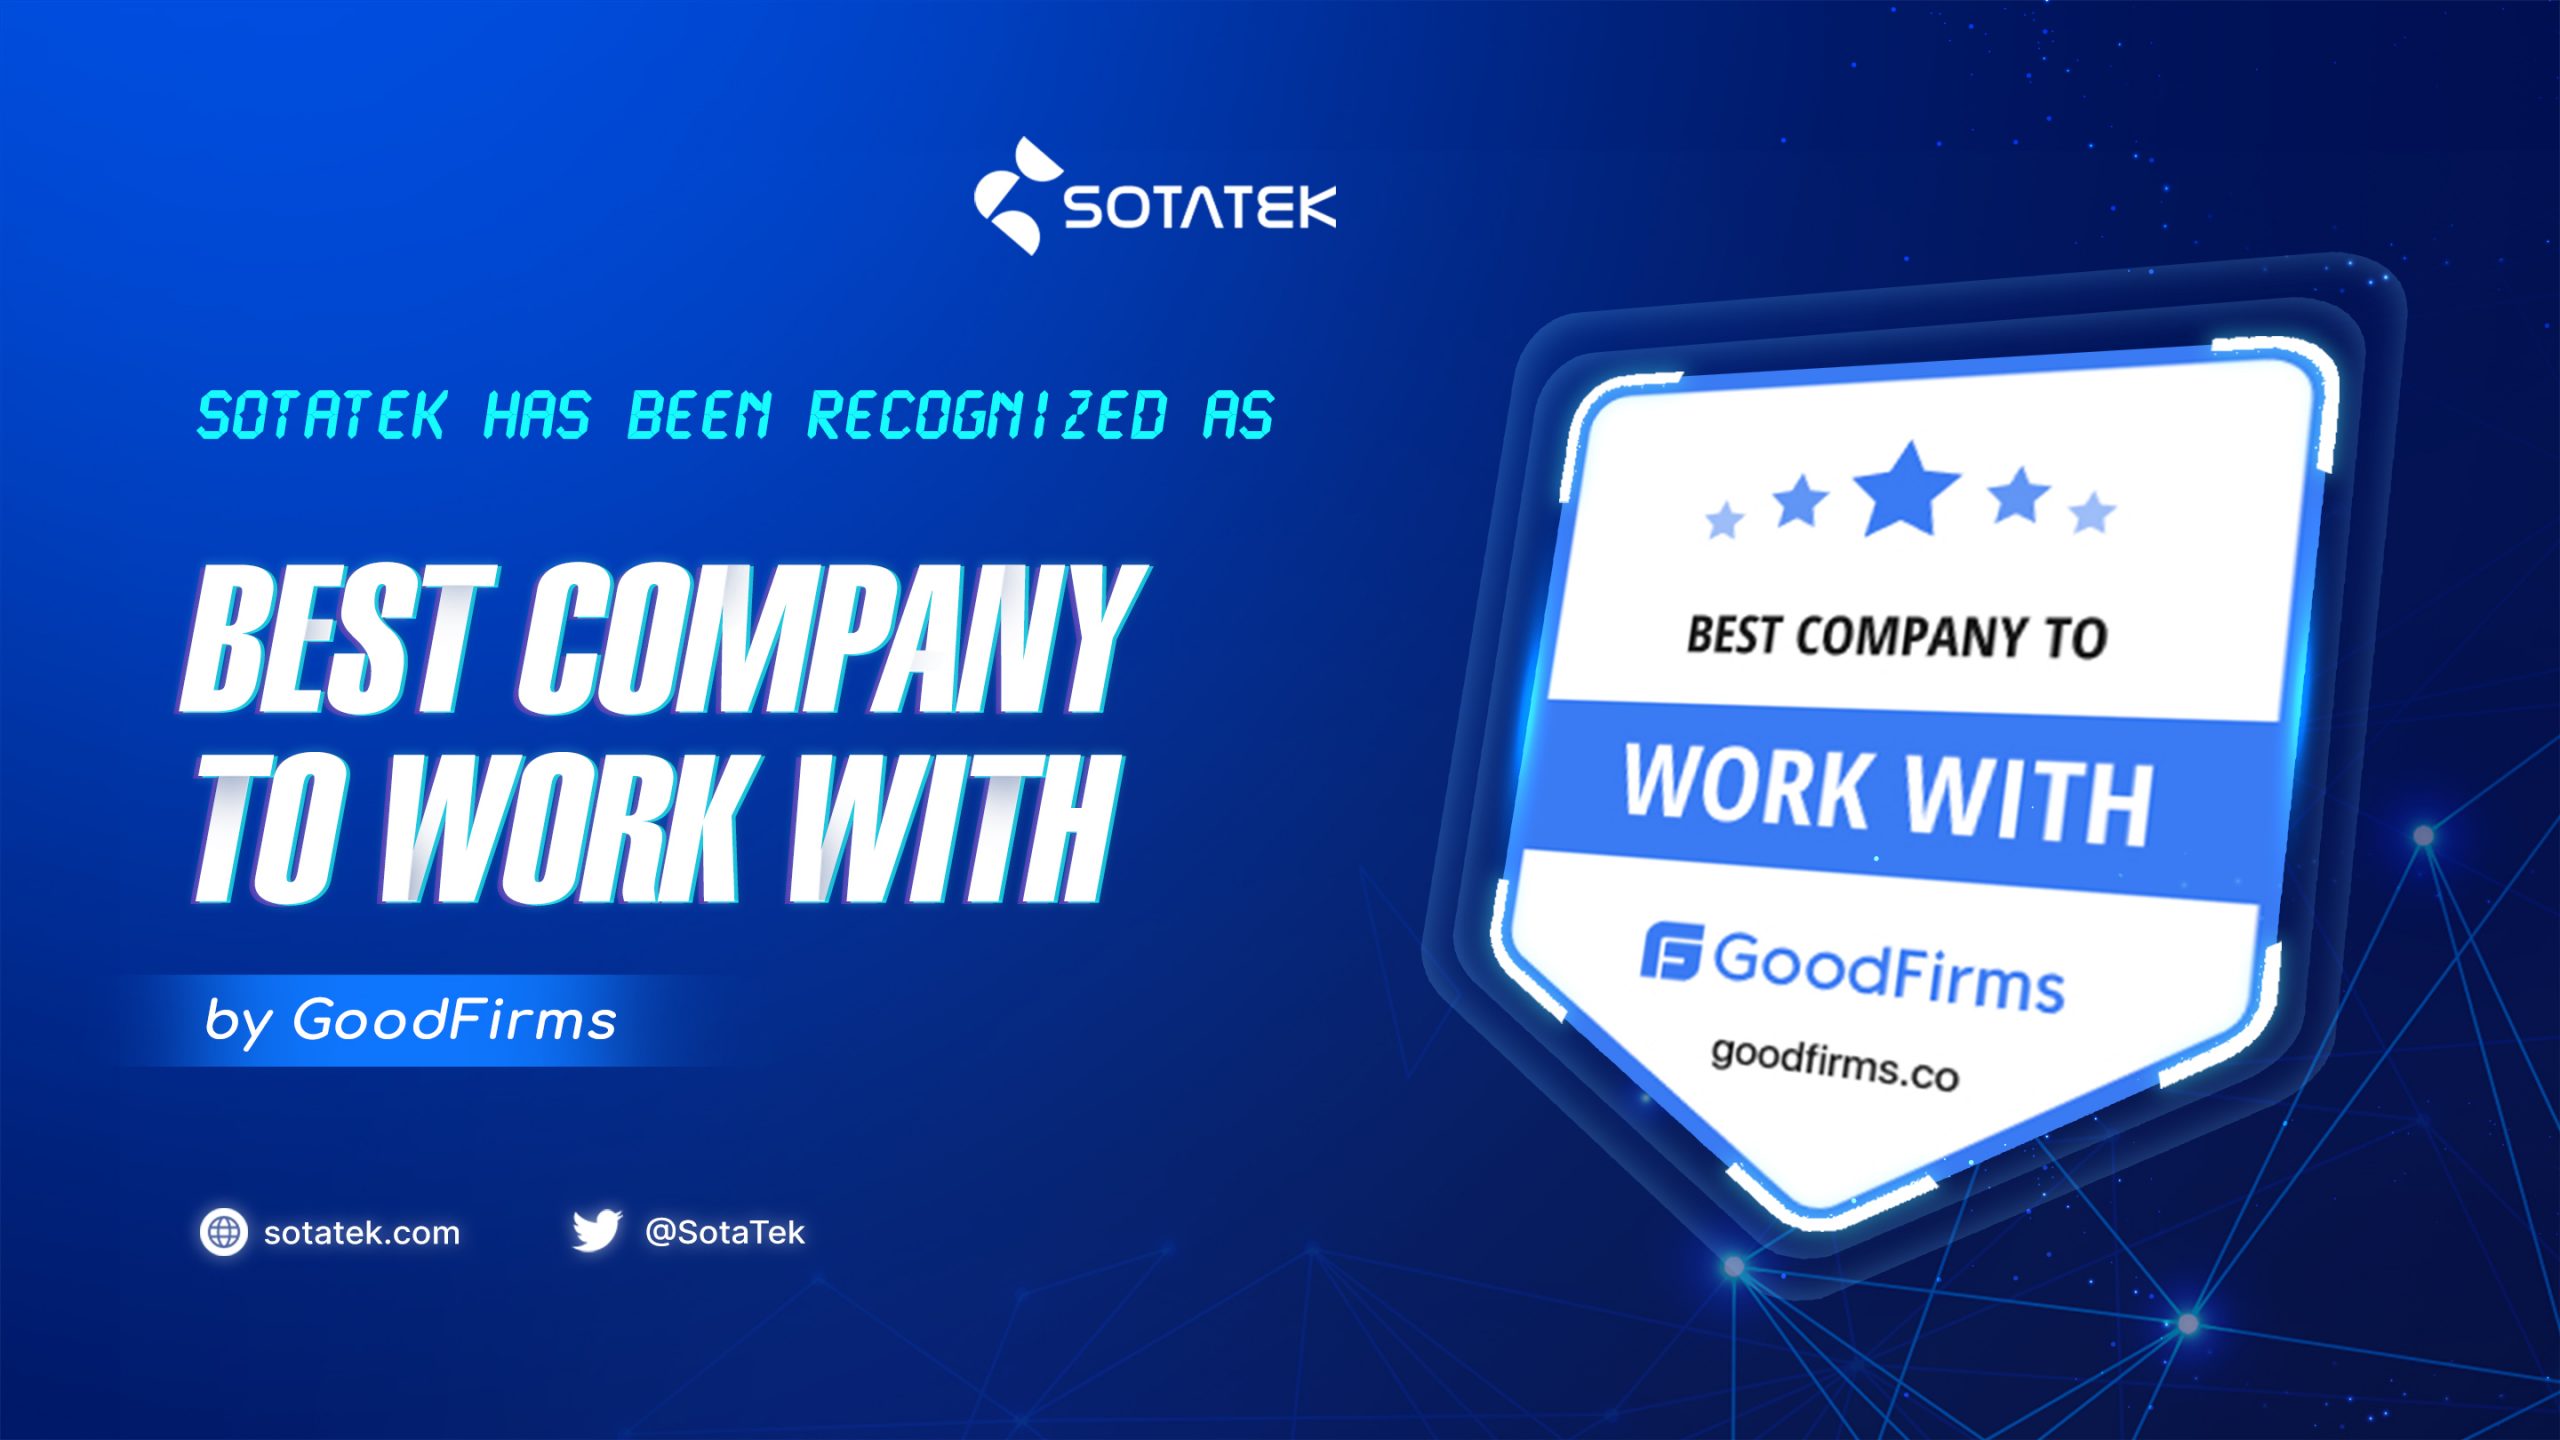 SotaTek Has been Recognized by GoodFirms as the Best Company to Work With